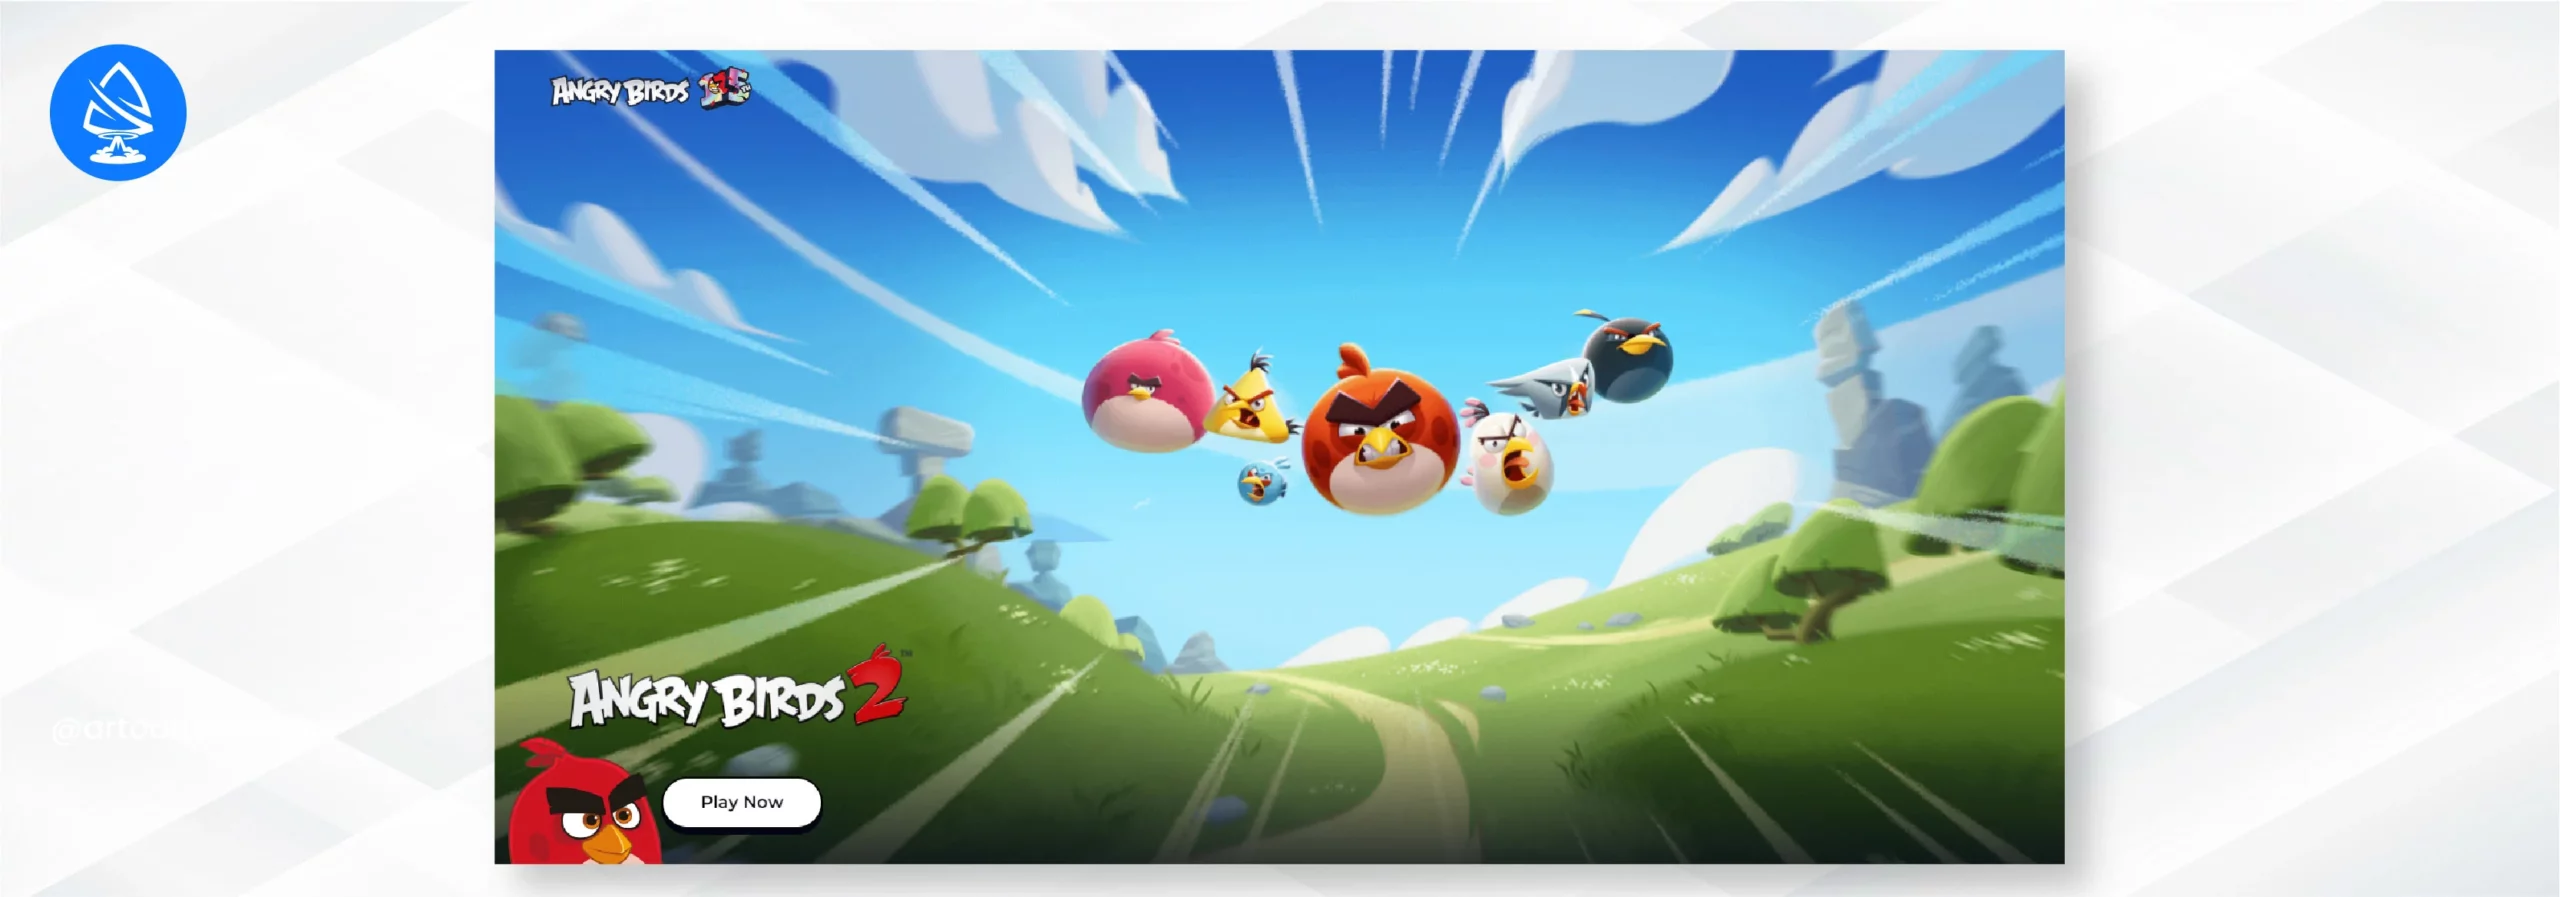 Angry Birds 2 cool unity 3d games